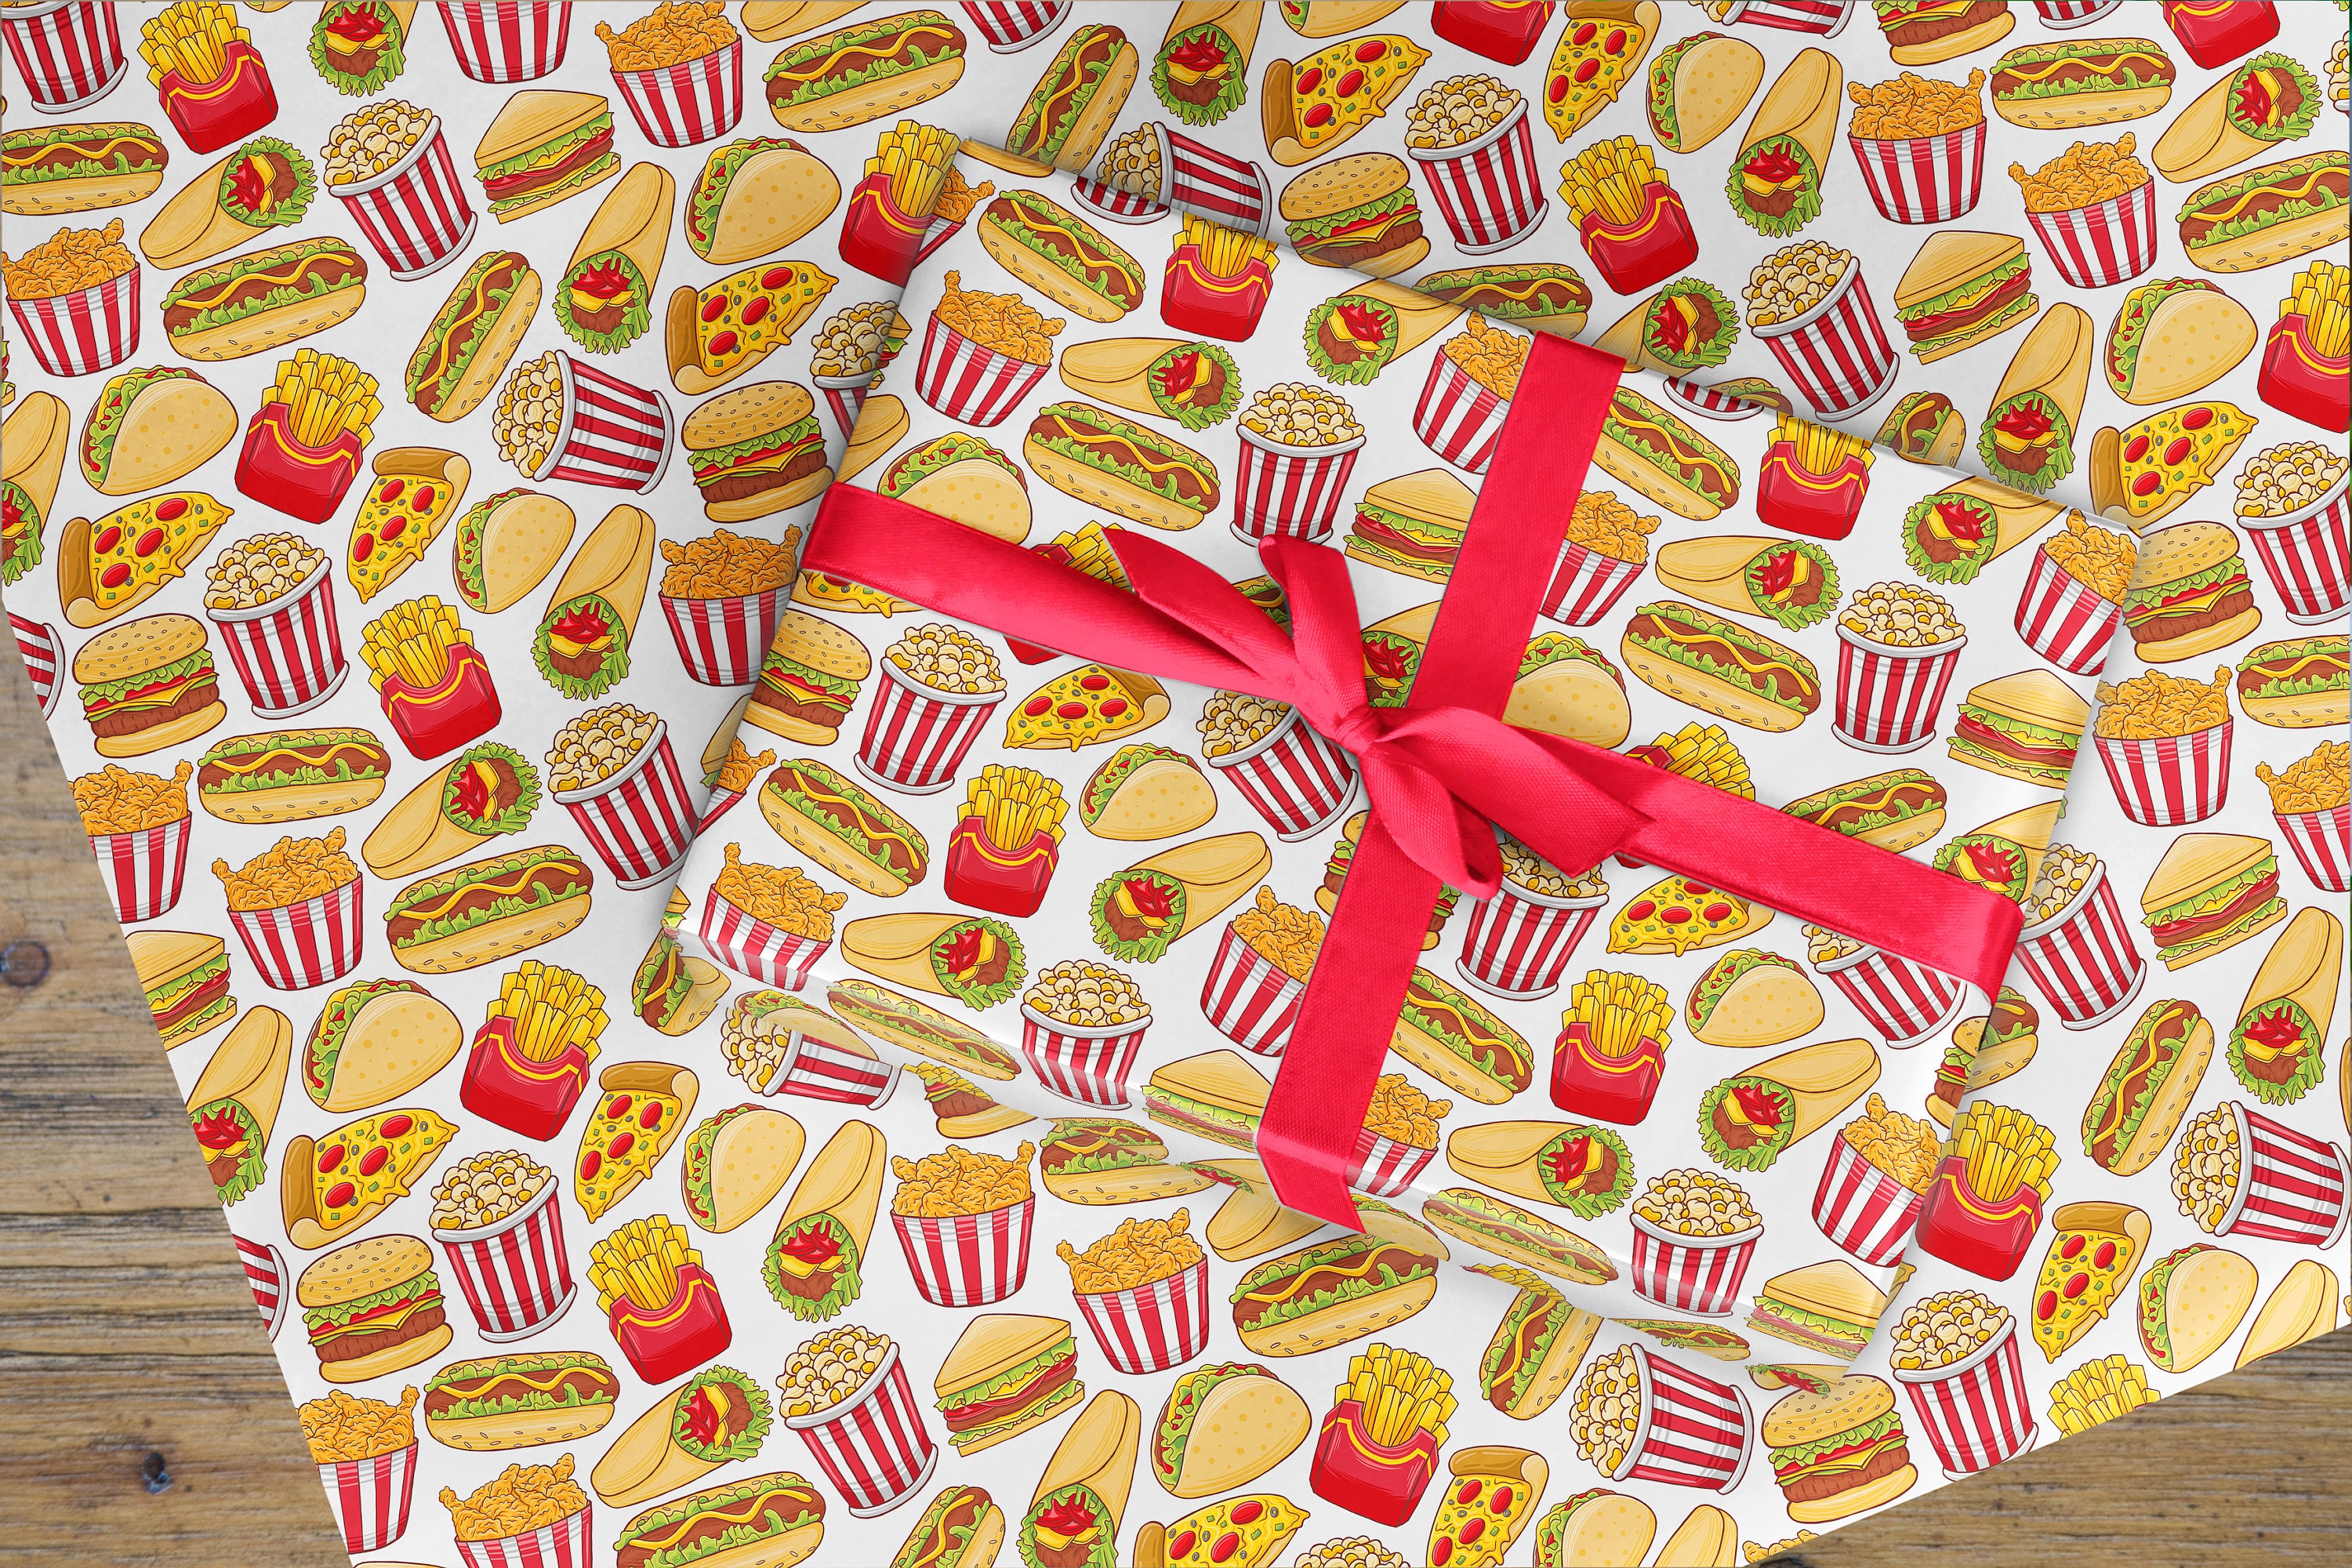 Wrapping Paper Roll Takeaway Fast Food Wrapping Paper, Hamburger